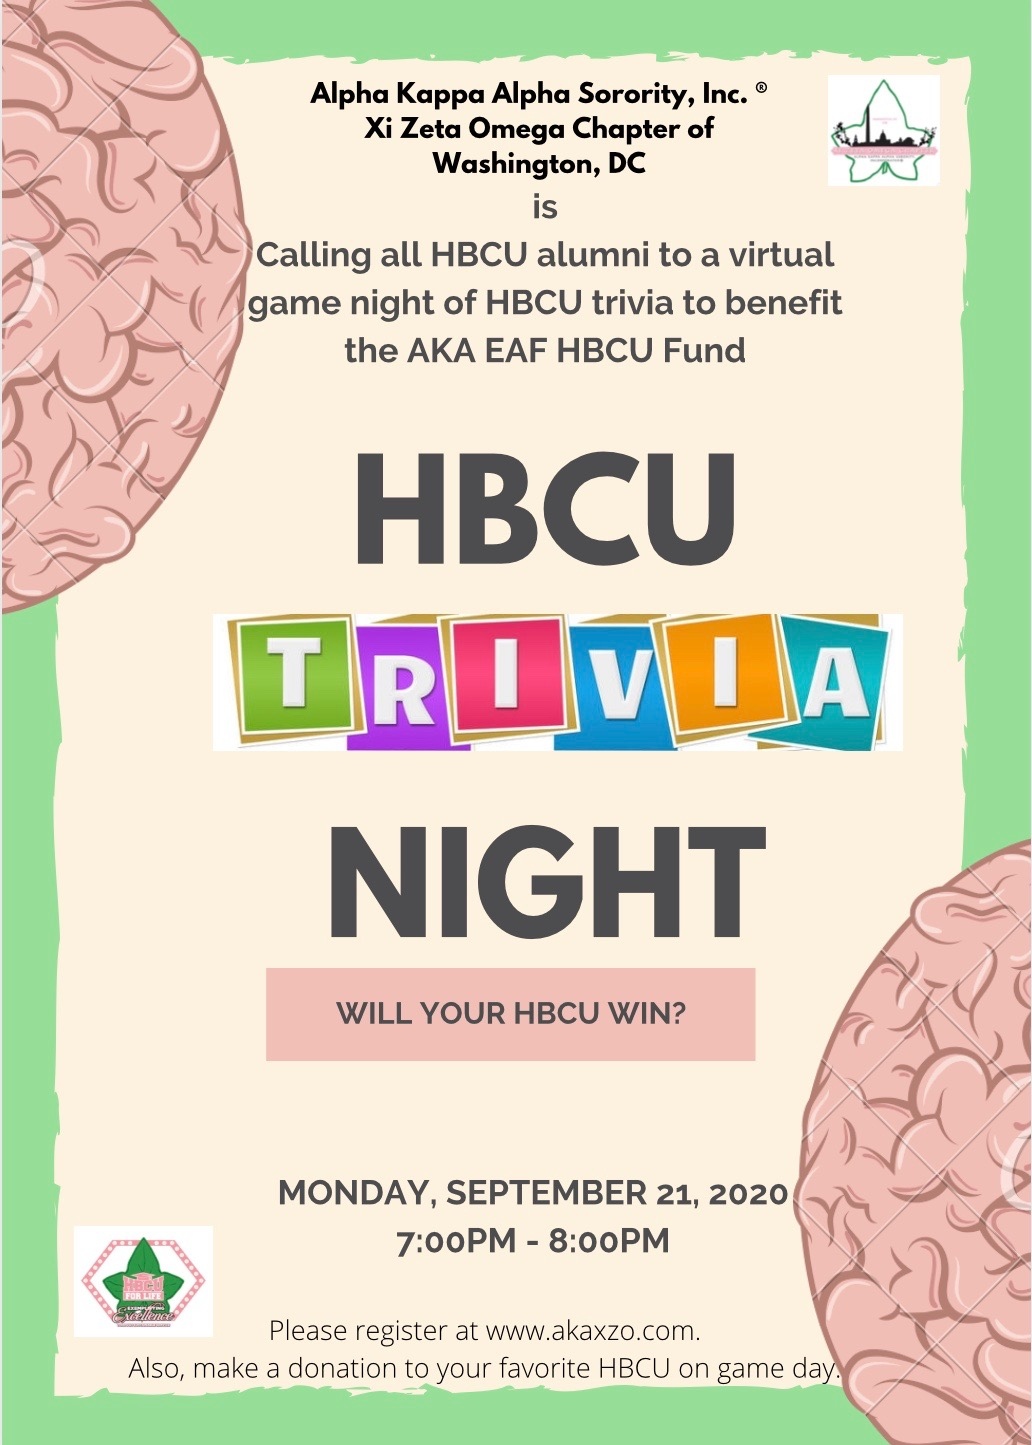 To recognize the achievements of our HBCU alumni and the impact that HBCUs have had on the world, Xi Zeta Omega Chapter is hosting a trivia game night. This event is open to all HBCU Alumni and Friends can play a friendly game of trivia but registration is REQUIRED. The alumni team that wins will have bragging rights for the year. Each player must contribute on game day to their favorite HBCU online or via the AKA EAF HBCU Fund at www.aka1908.org.  Wear your favorite HBCU shirt and represent your school!